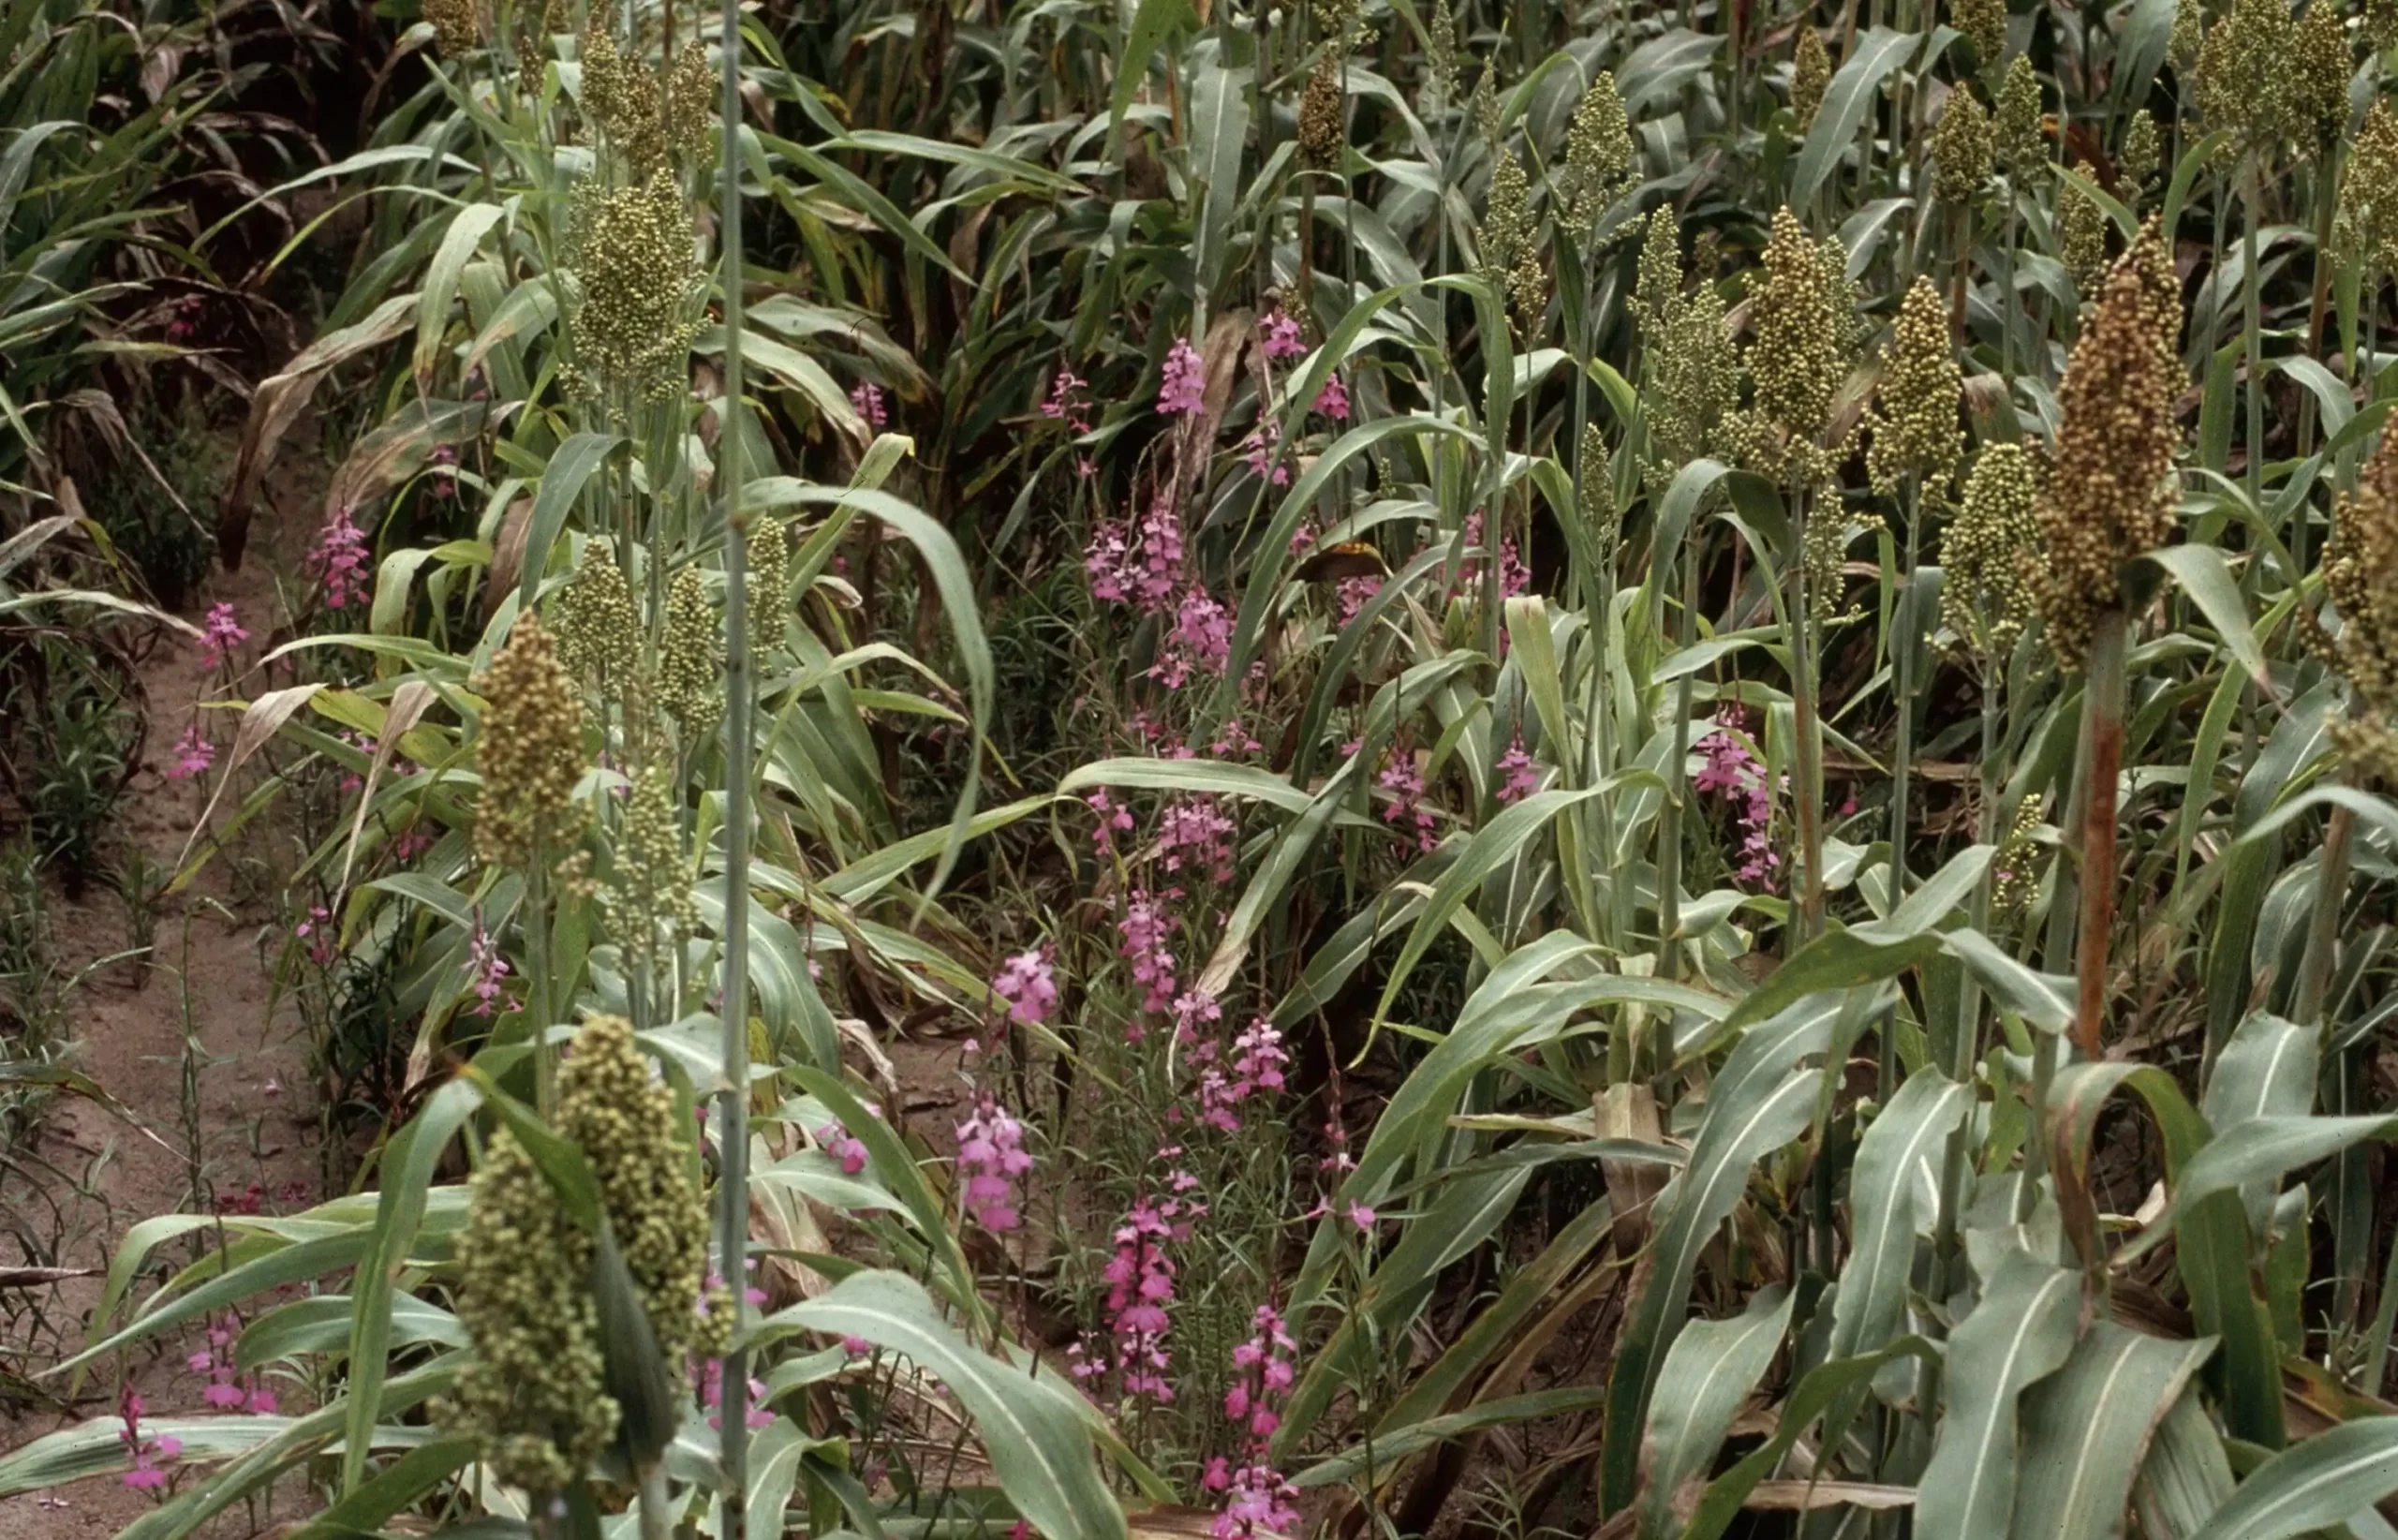 Researchers identify microbes that help sorghum plants thwart parasite